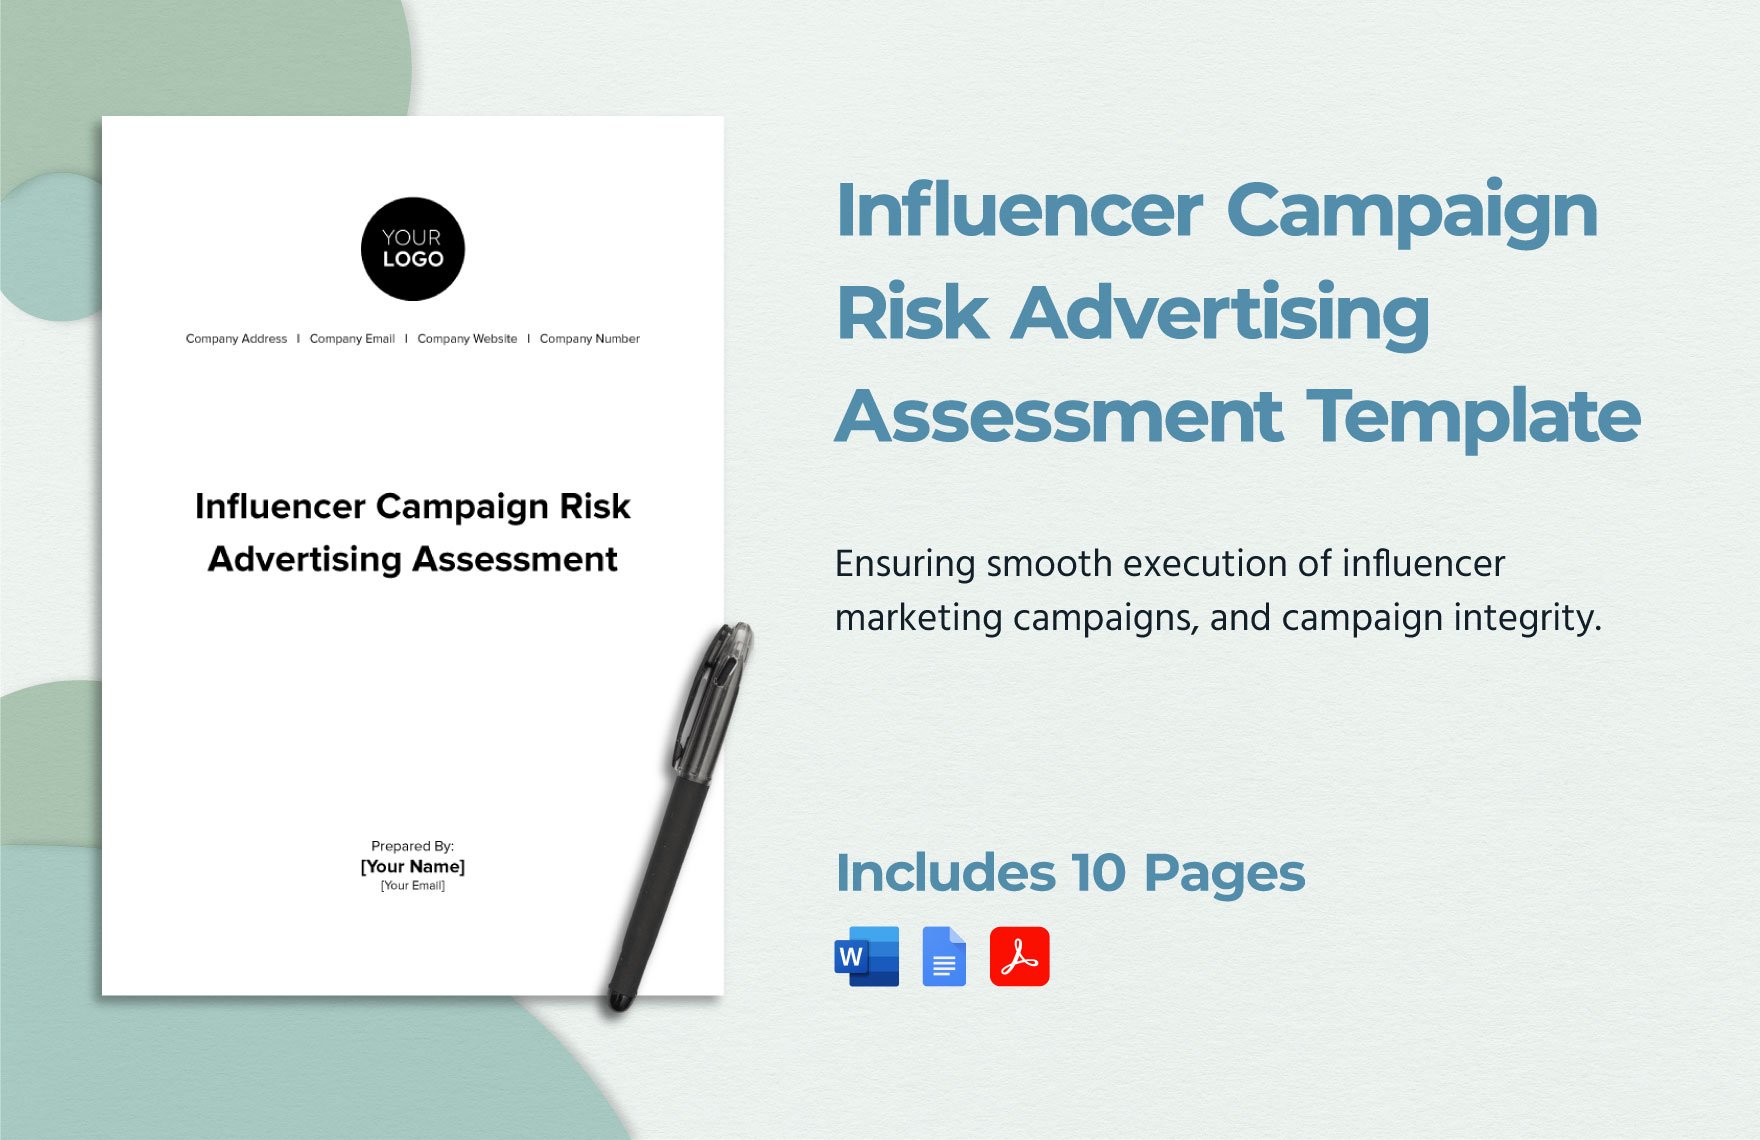 Influencer Campaign Risk Advertising Assessment Template